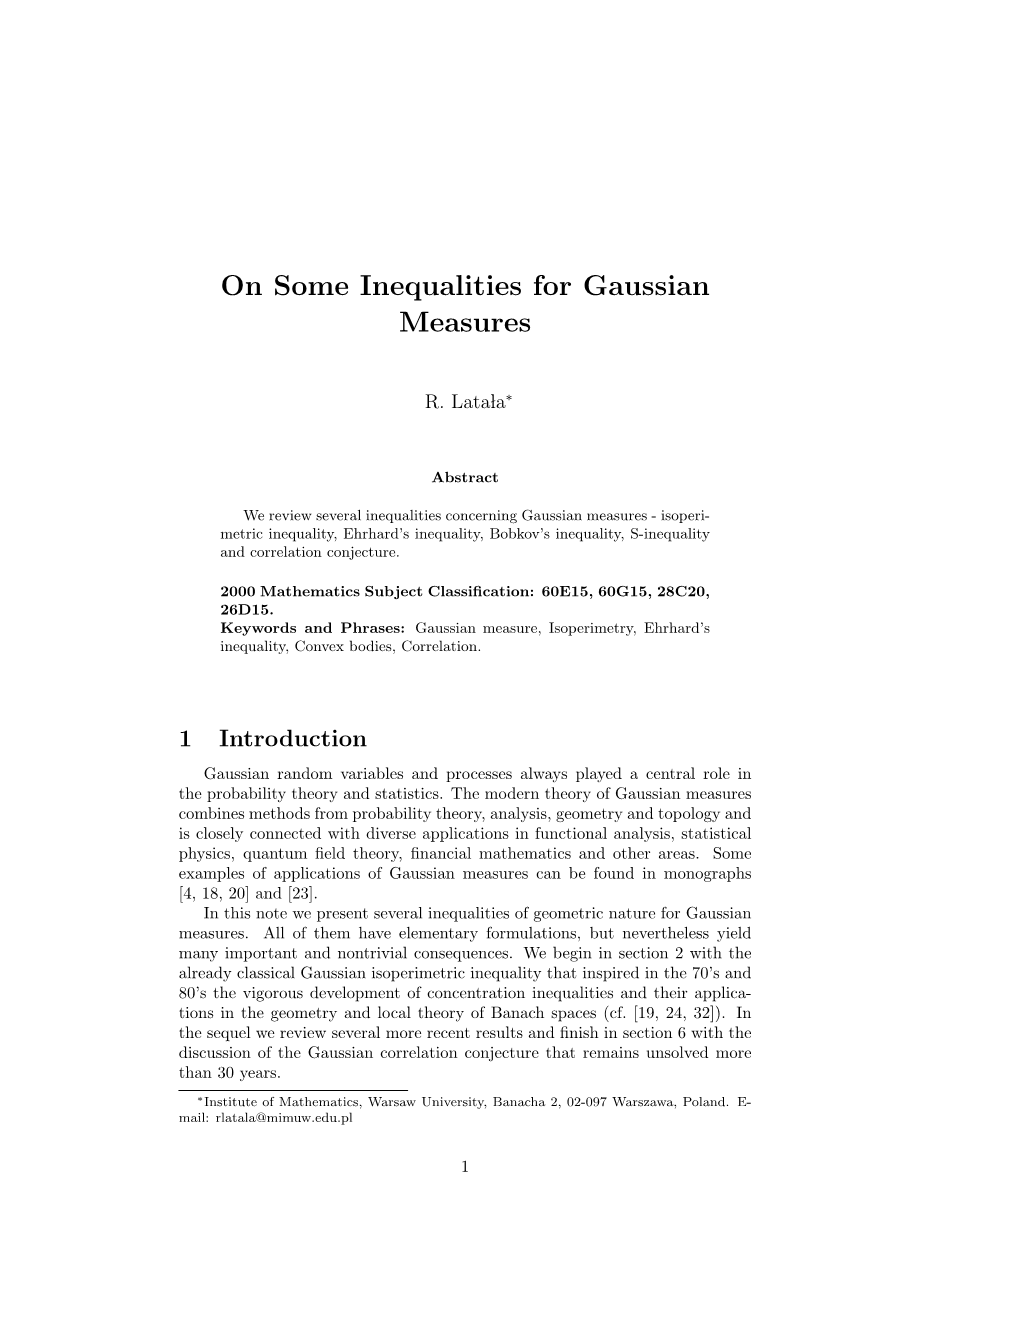 On Some Inequalities for Gaussian Measures